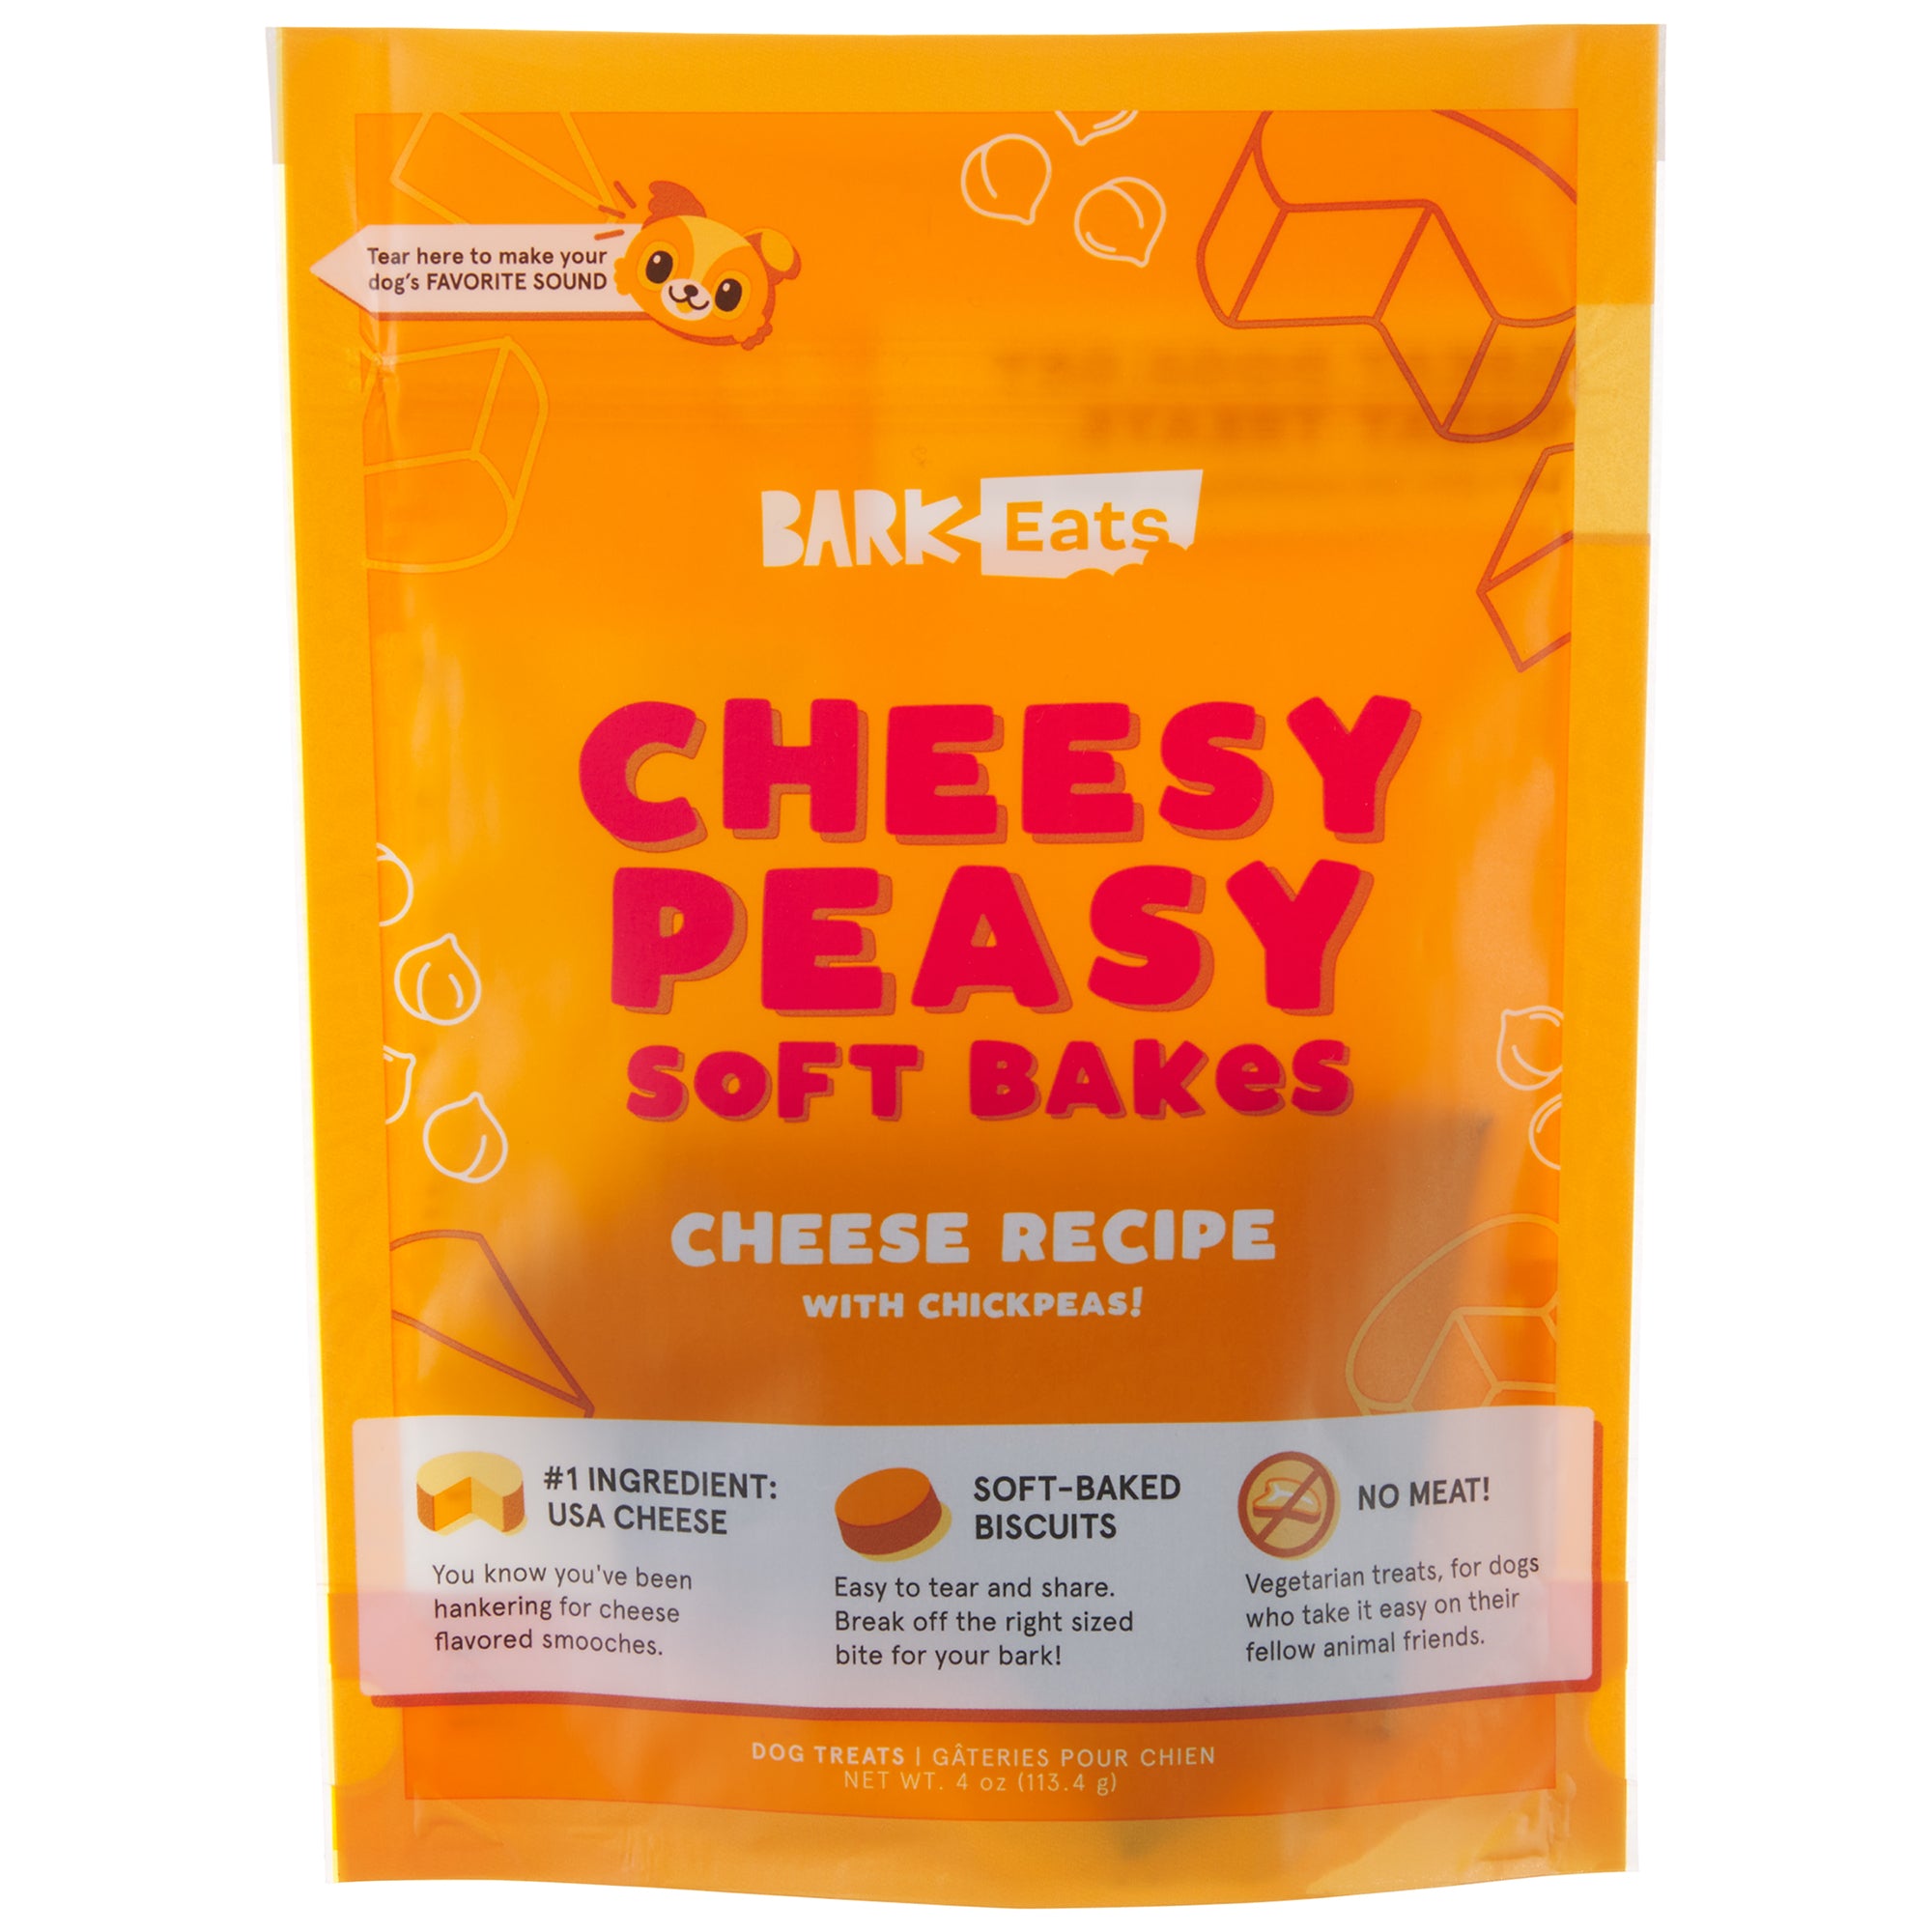 Cheesey Peazy Soft Bakes